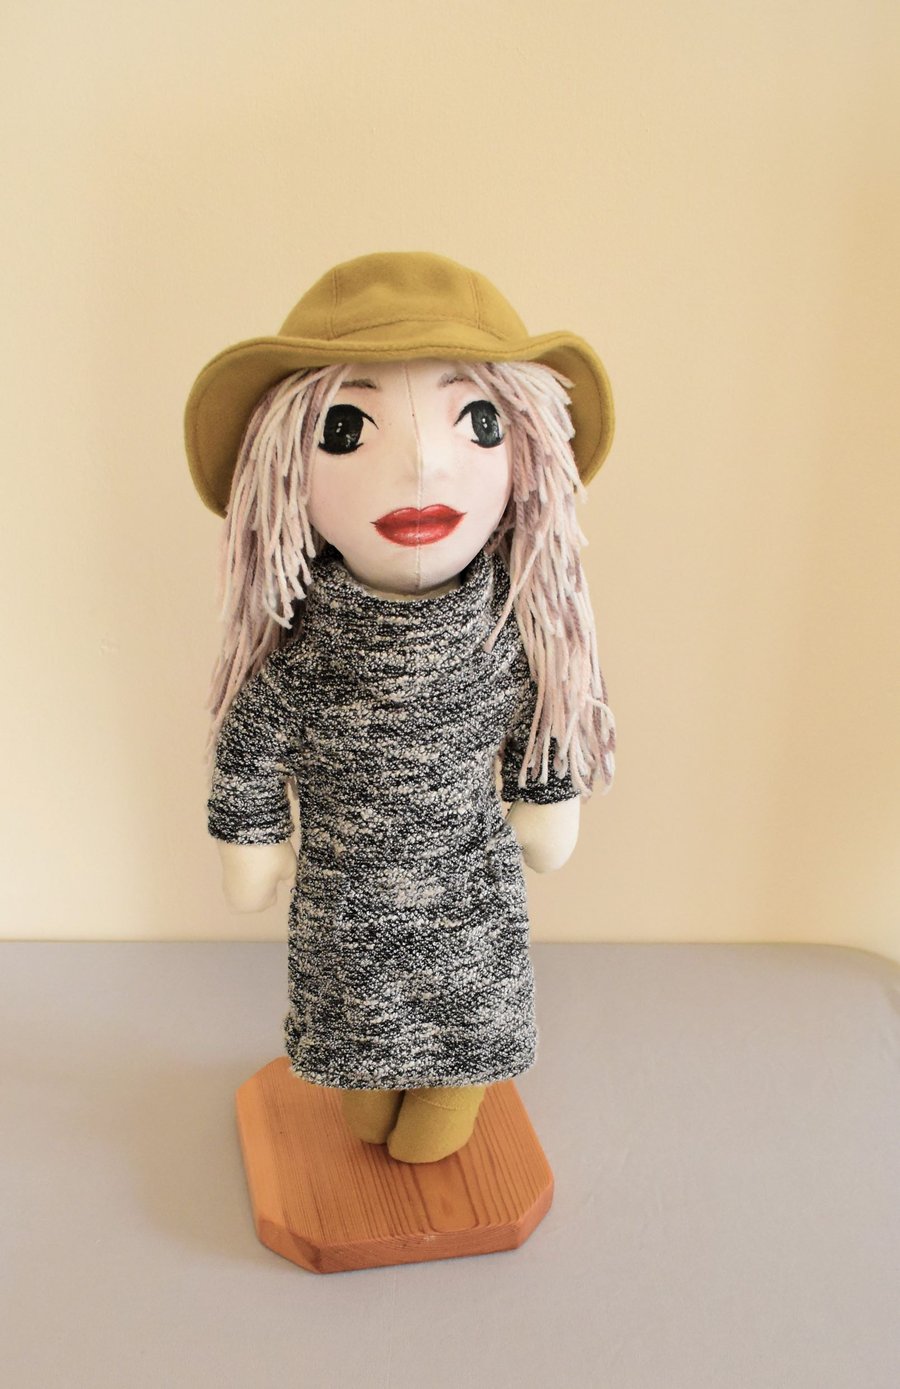 Miss in a hat handmade doll